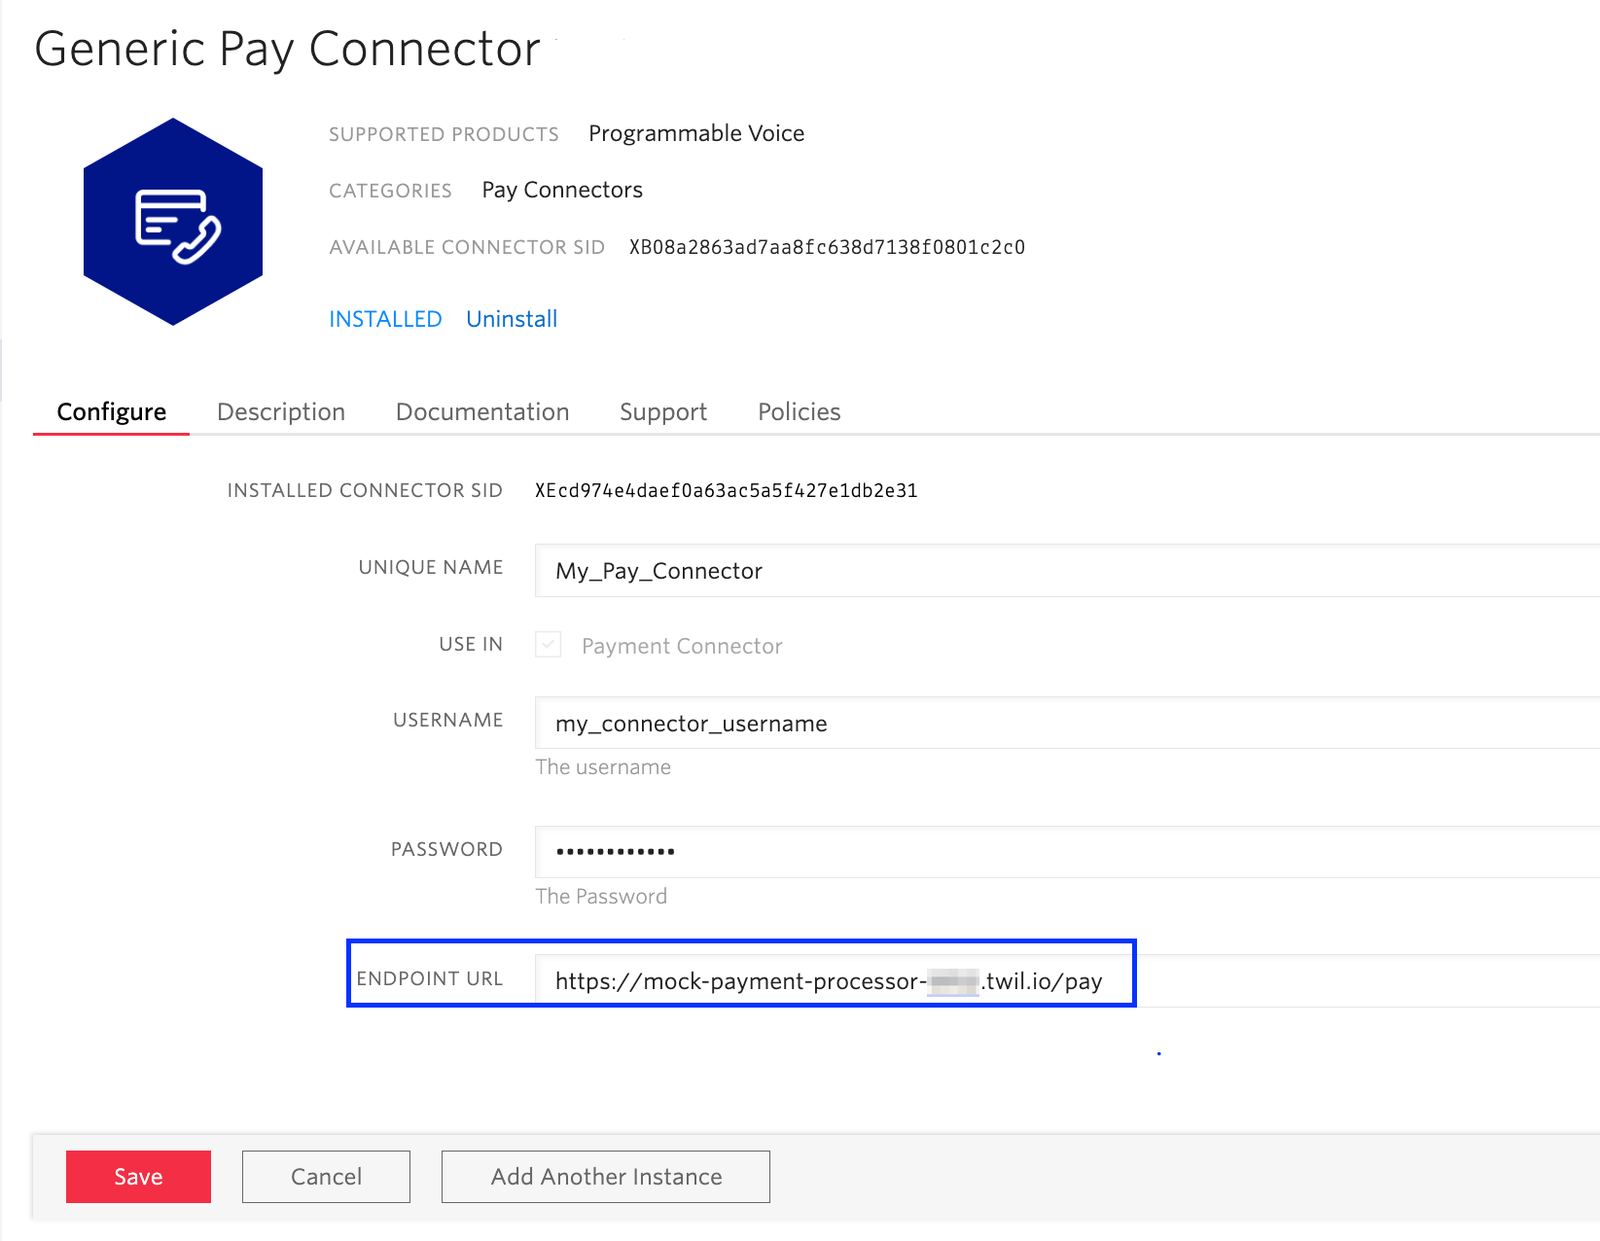 Update your Generic Pay Connector Endpoint URL with the URL of your mock-payment-processor Twilio Function URL.